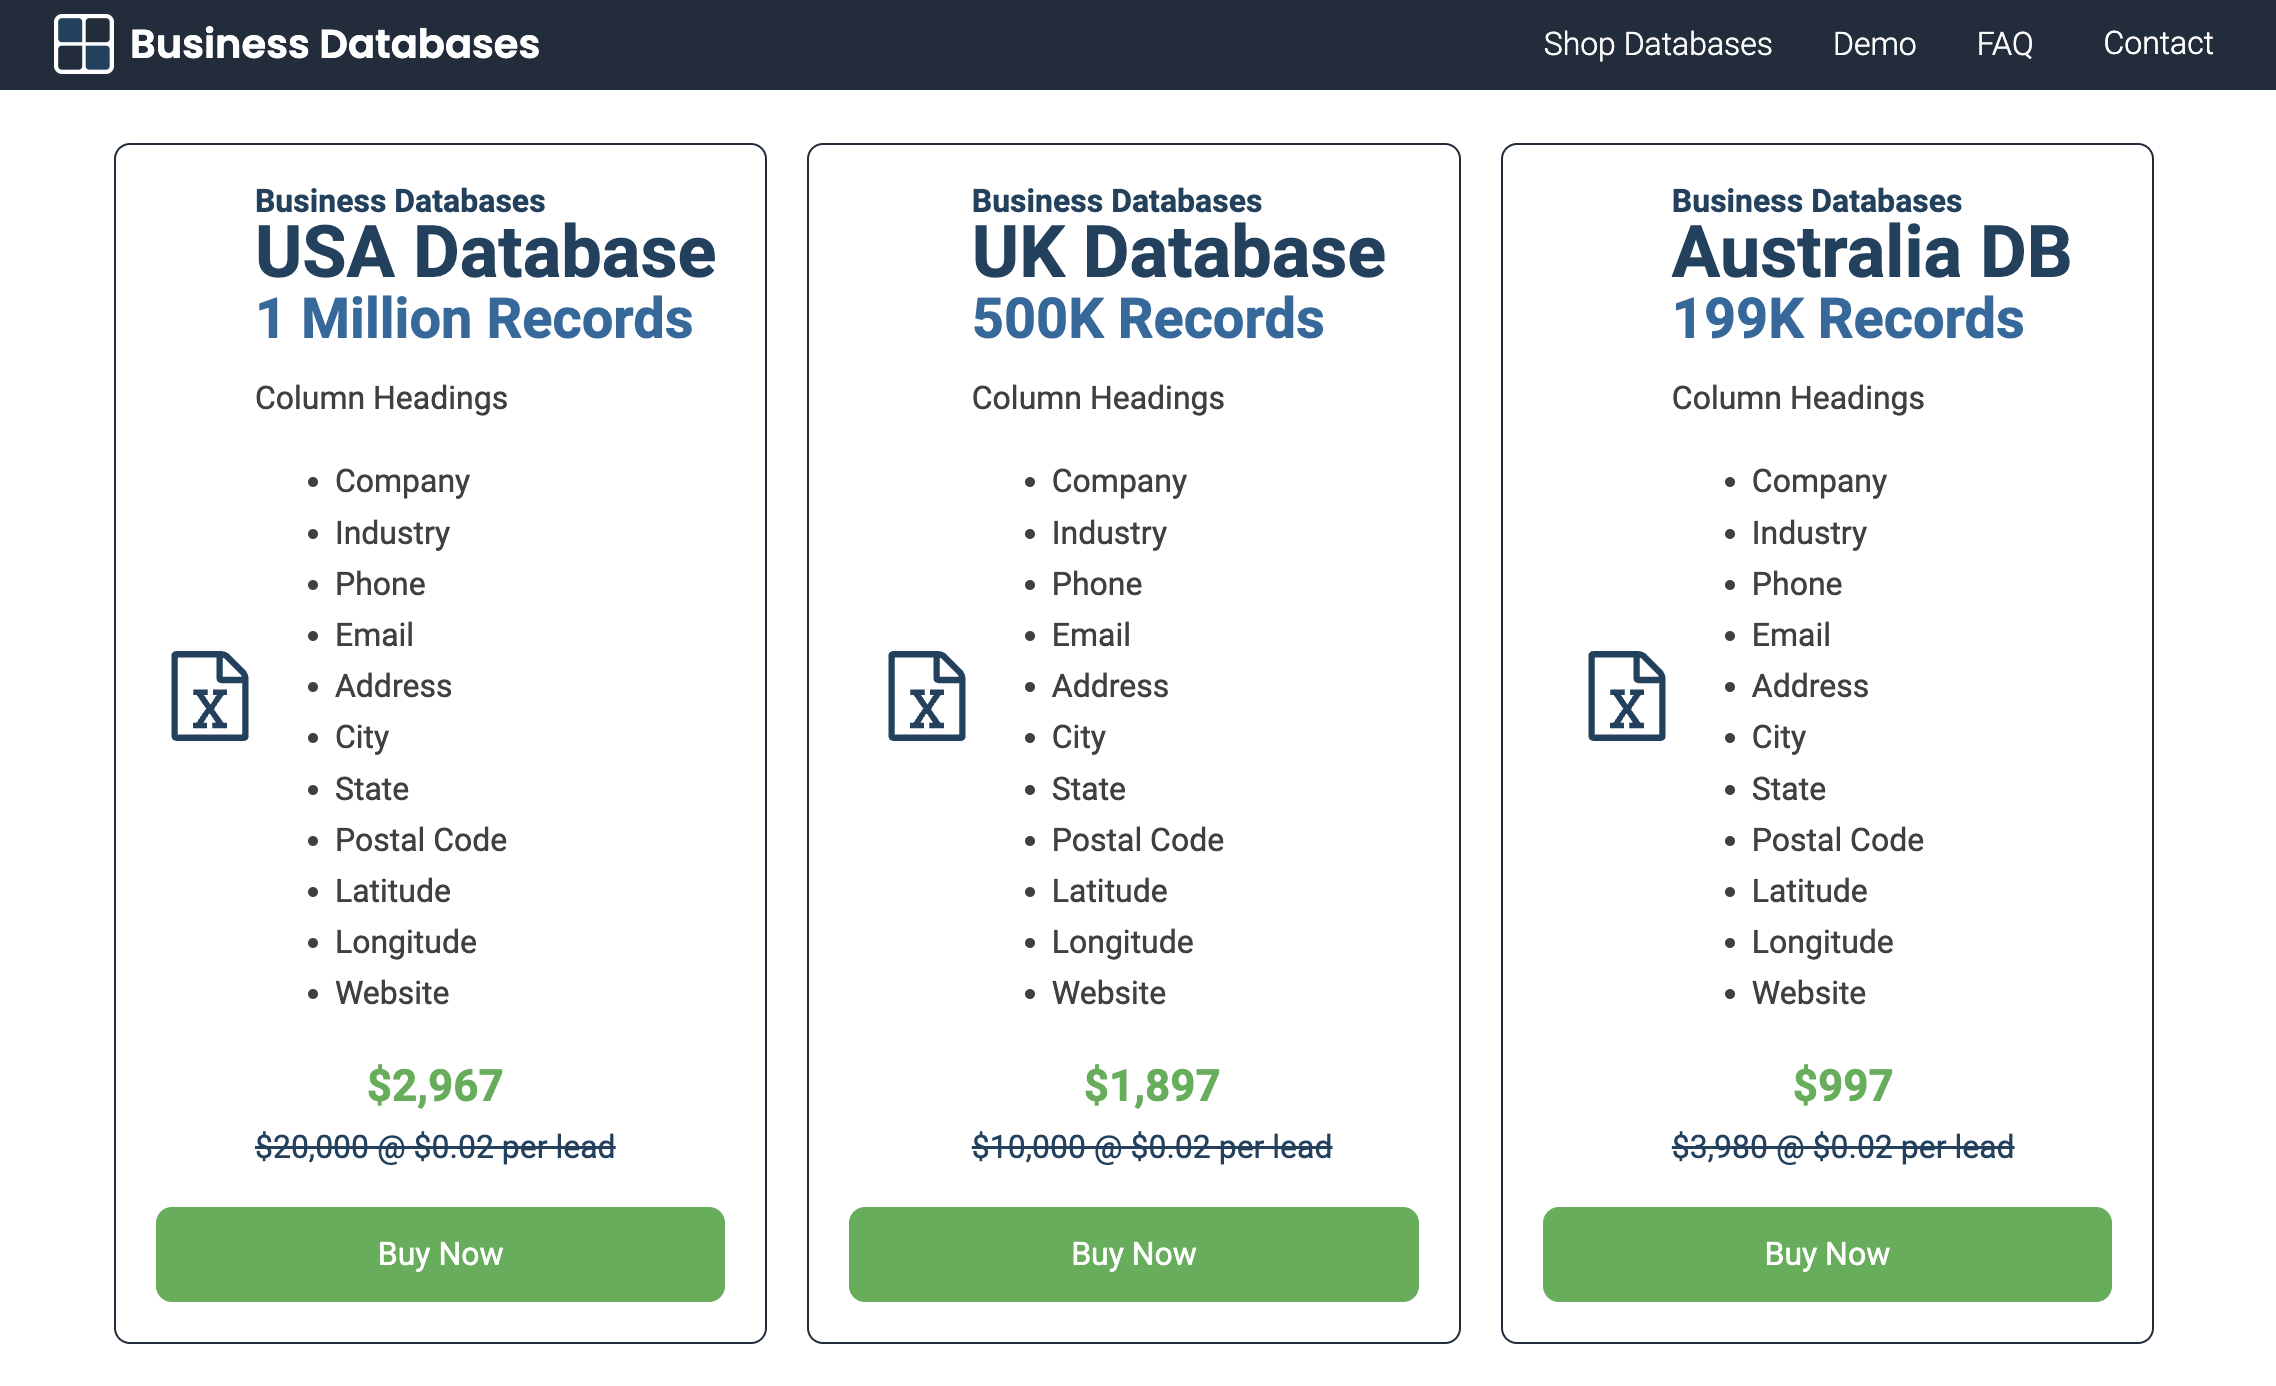 Business Databases Offers Full USA Database with 1 Million Businesses for Just $2967